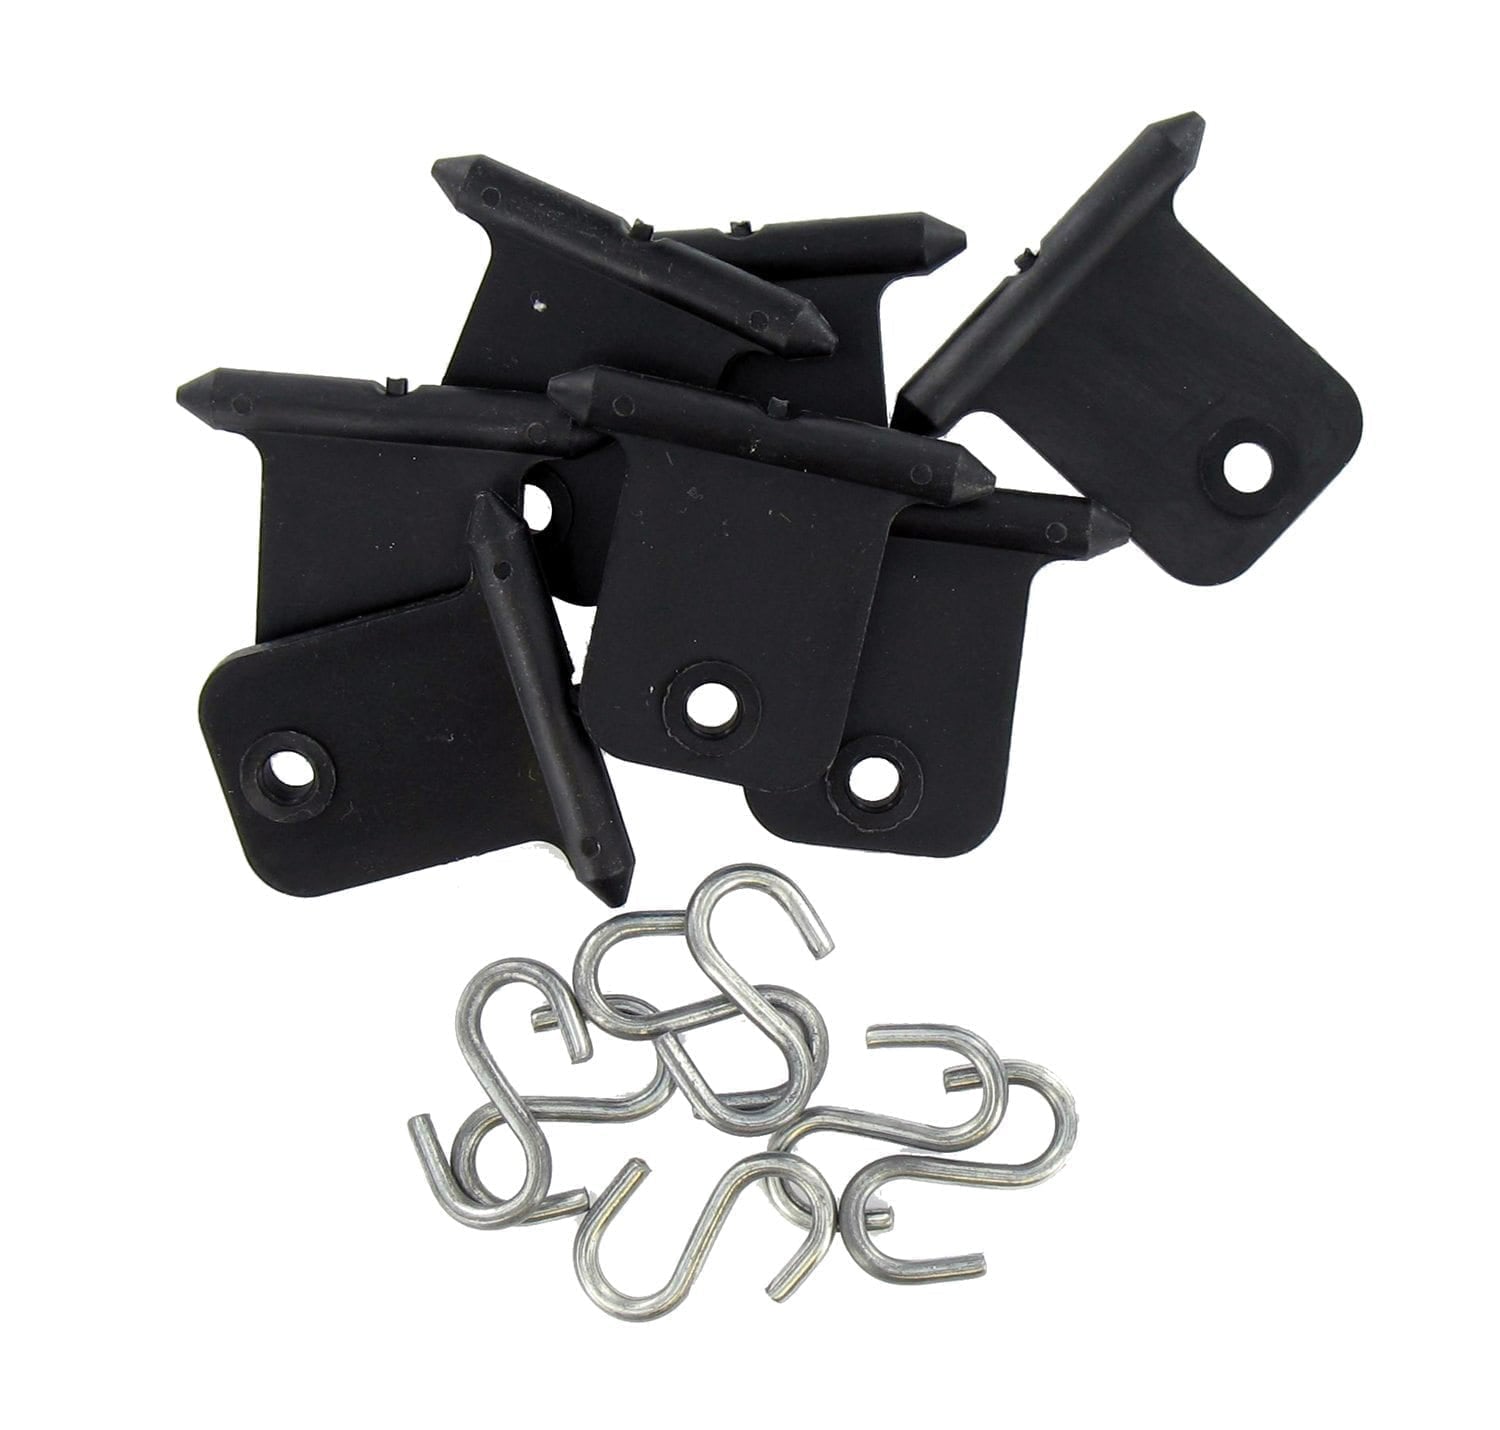 Valterra A77041 Awning Accessory Hangers - Black